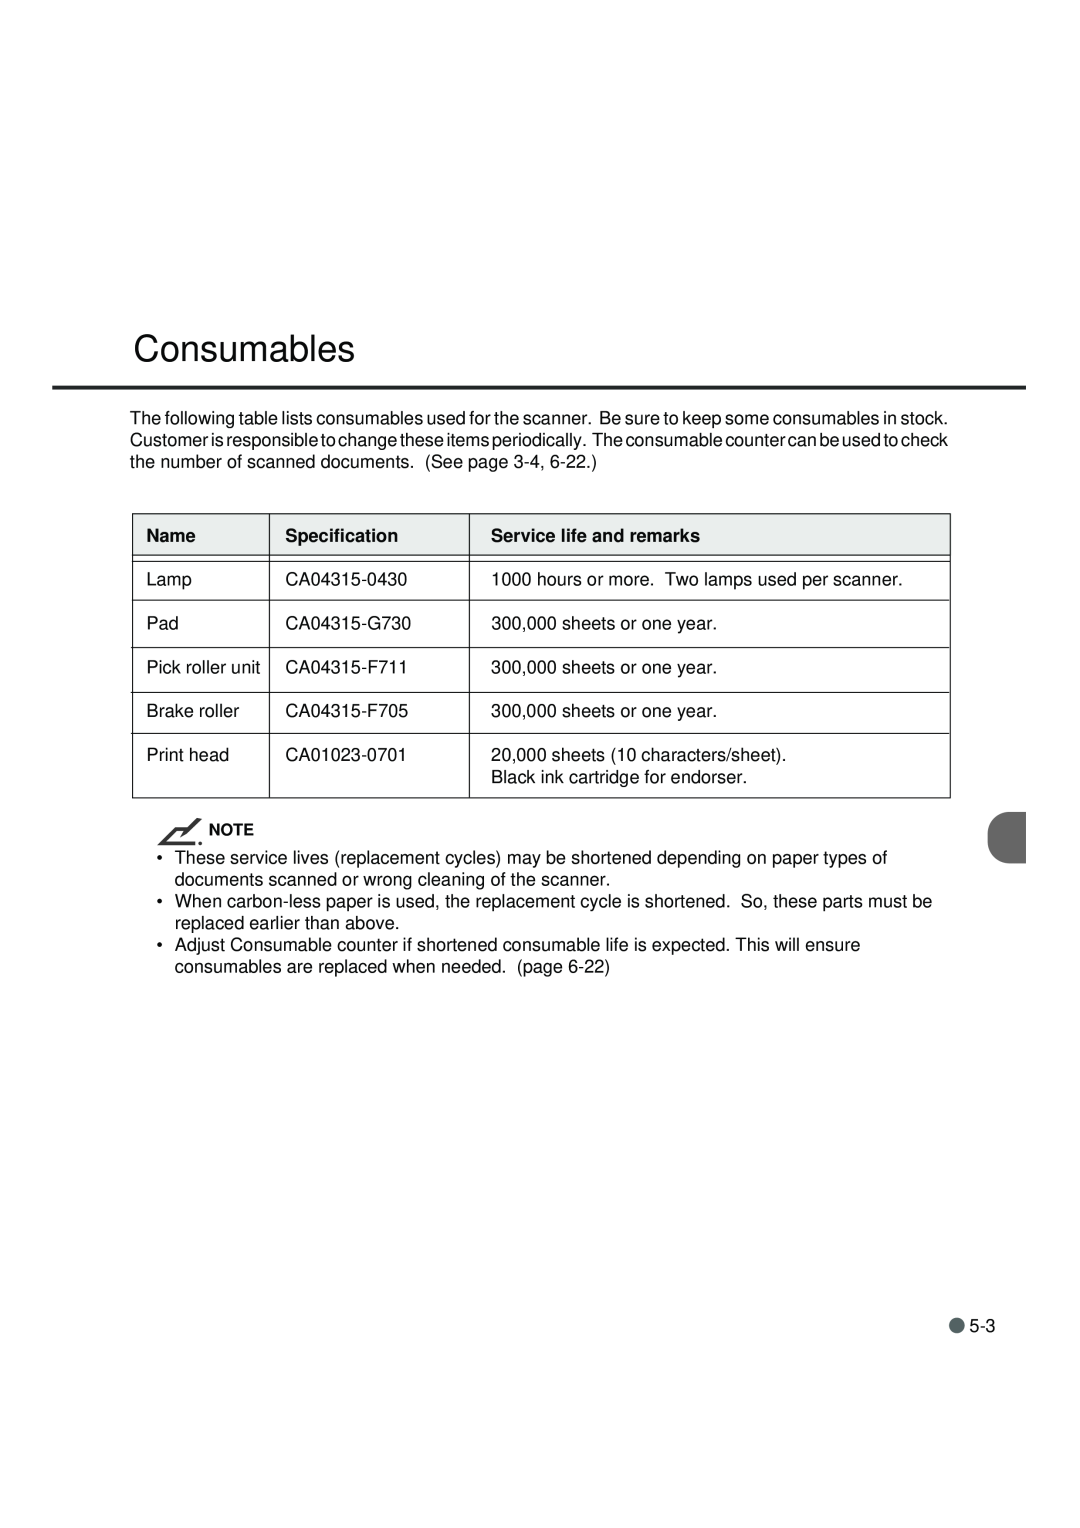 Fujitsu fi-4990C manual Consumables, Service life and remarks, Name, Specification 